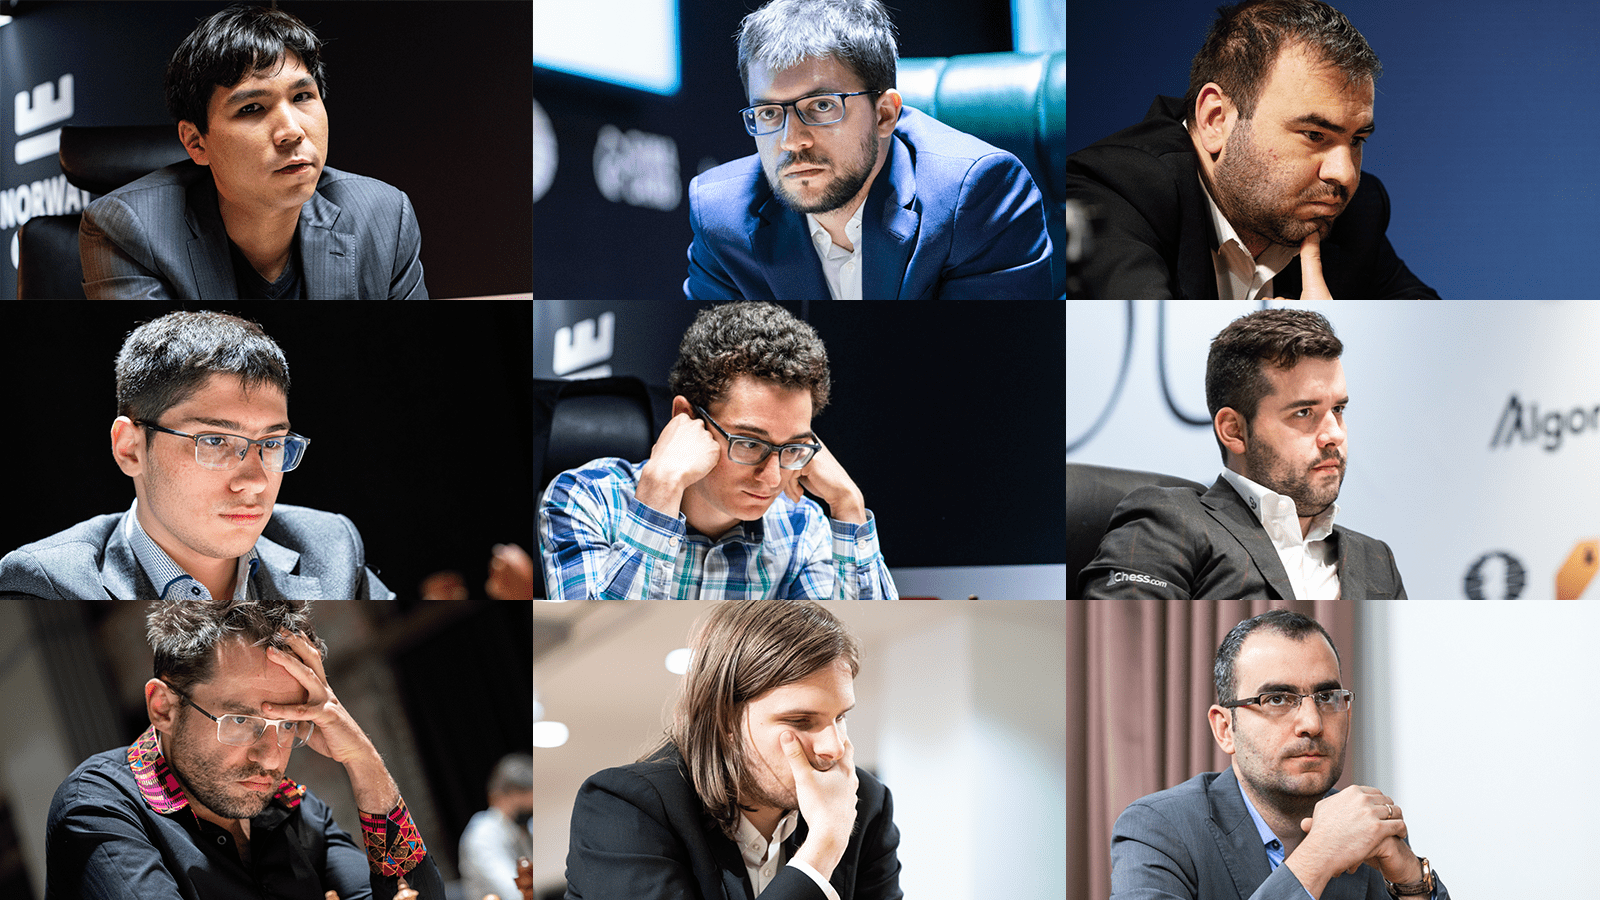 The greatest chess players of the world kick off the Grand Chess Tour 2022  - Business Review